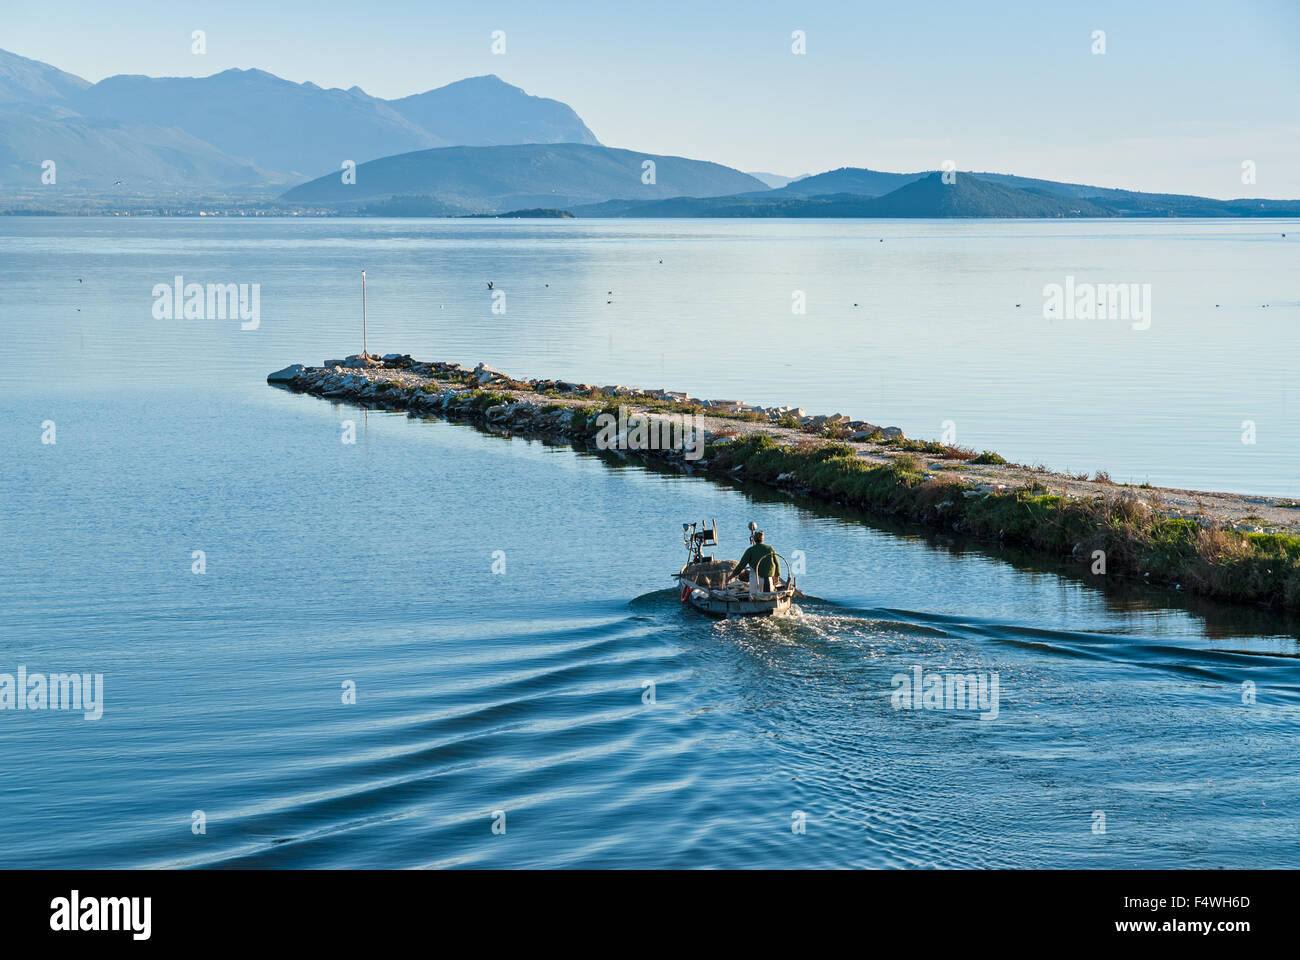 A fisherman in his traditional wooden boat leaves the harbor, going to work on November 10, 2013 in Amvrakikos gulf, Greece. Stock Photo